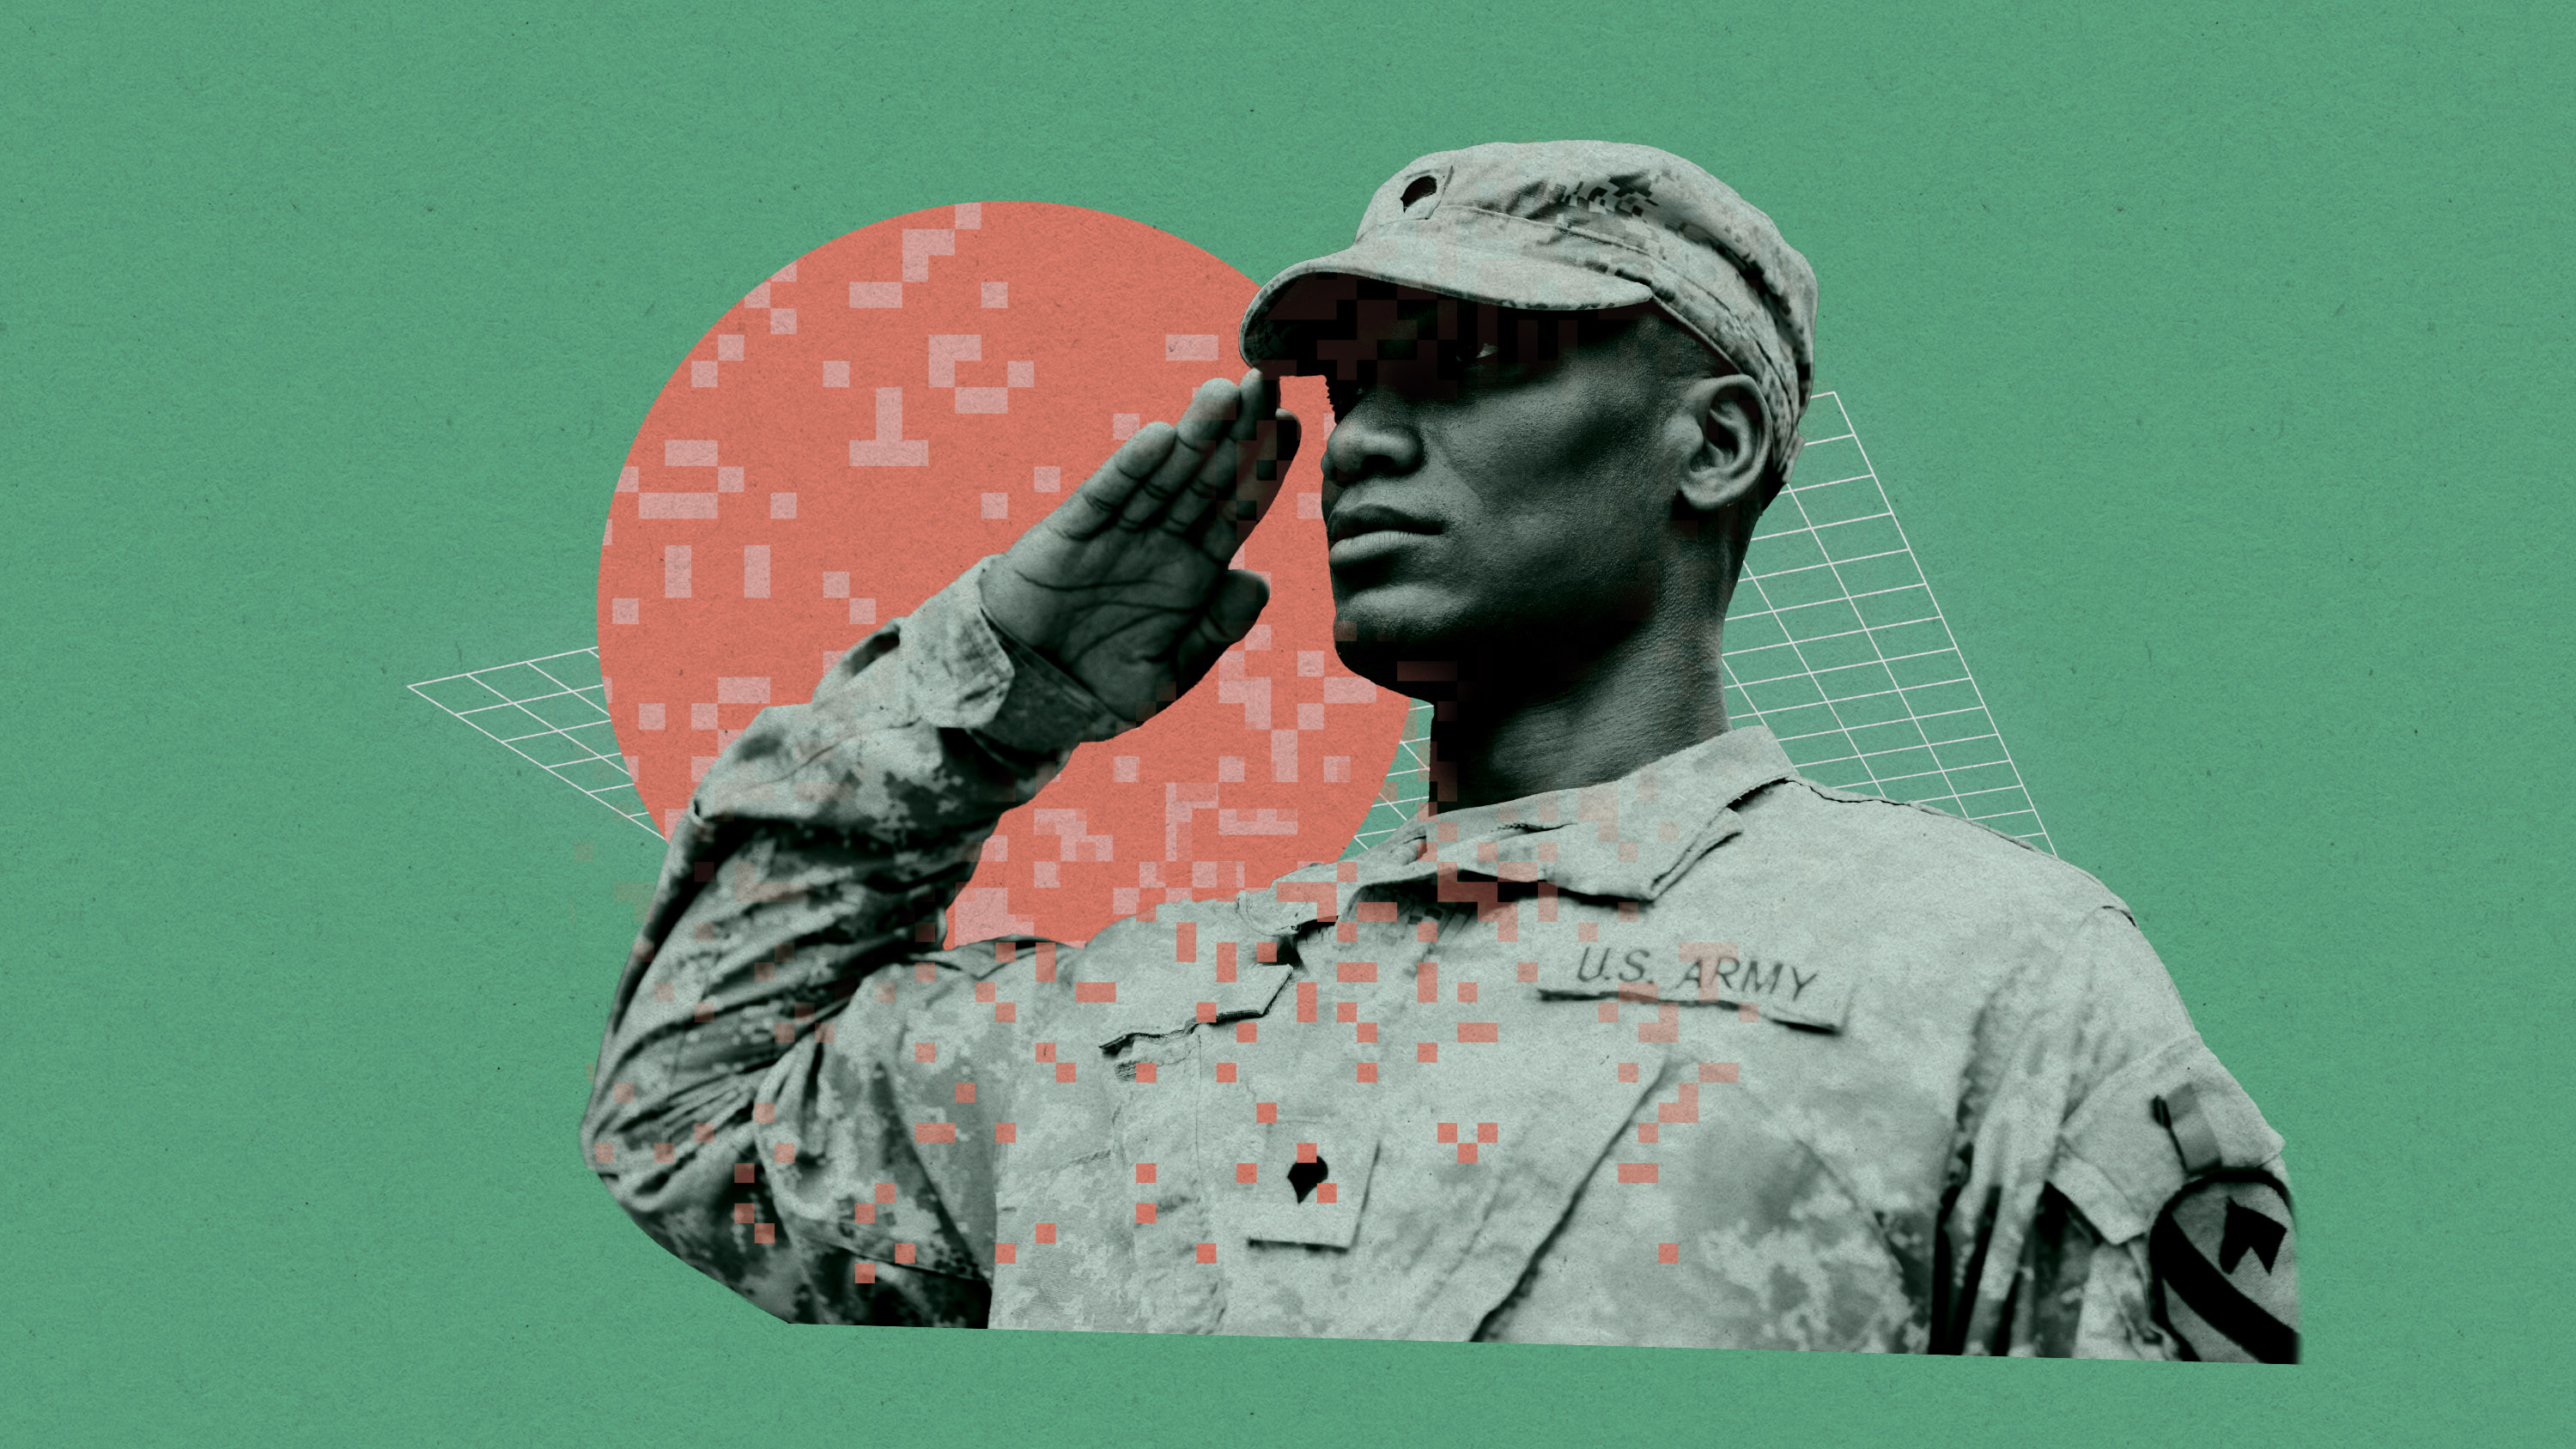 the head and shoulders of a US Army soldier standing at attention with pixels